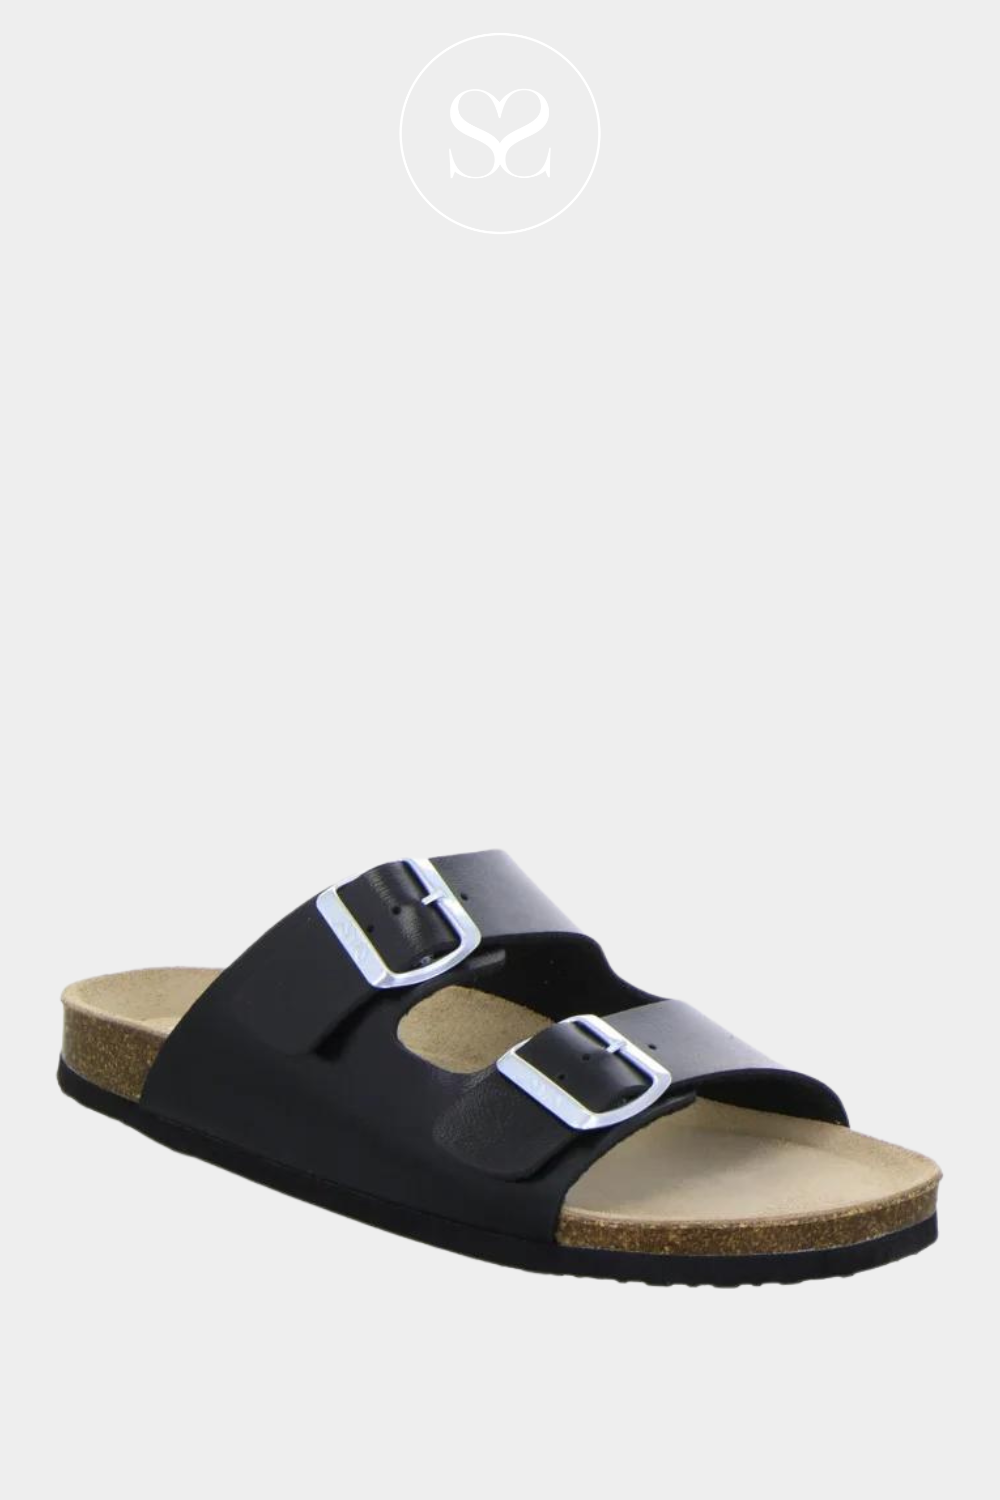 ARA 15-17018 BLACK LEATHER SLIDER MULE STYLE SANDALS WITH DOUBLE STRAP AND SILVER BUCKLESARA 15-17018 BLACK LEATHER SLIDER MULE STYLE SANDALS WITH DOUBLE STRAP AND SILVER BUCKLES